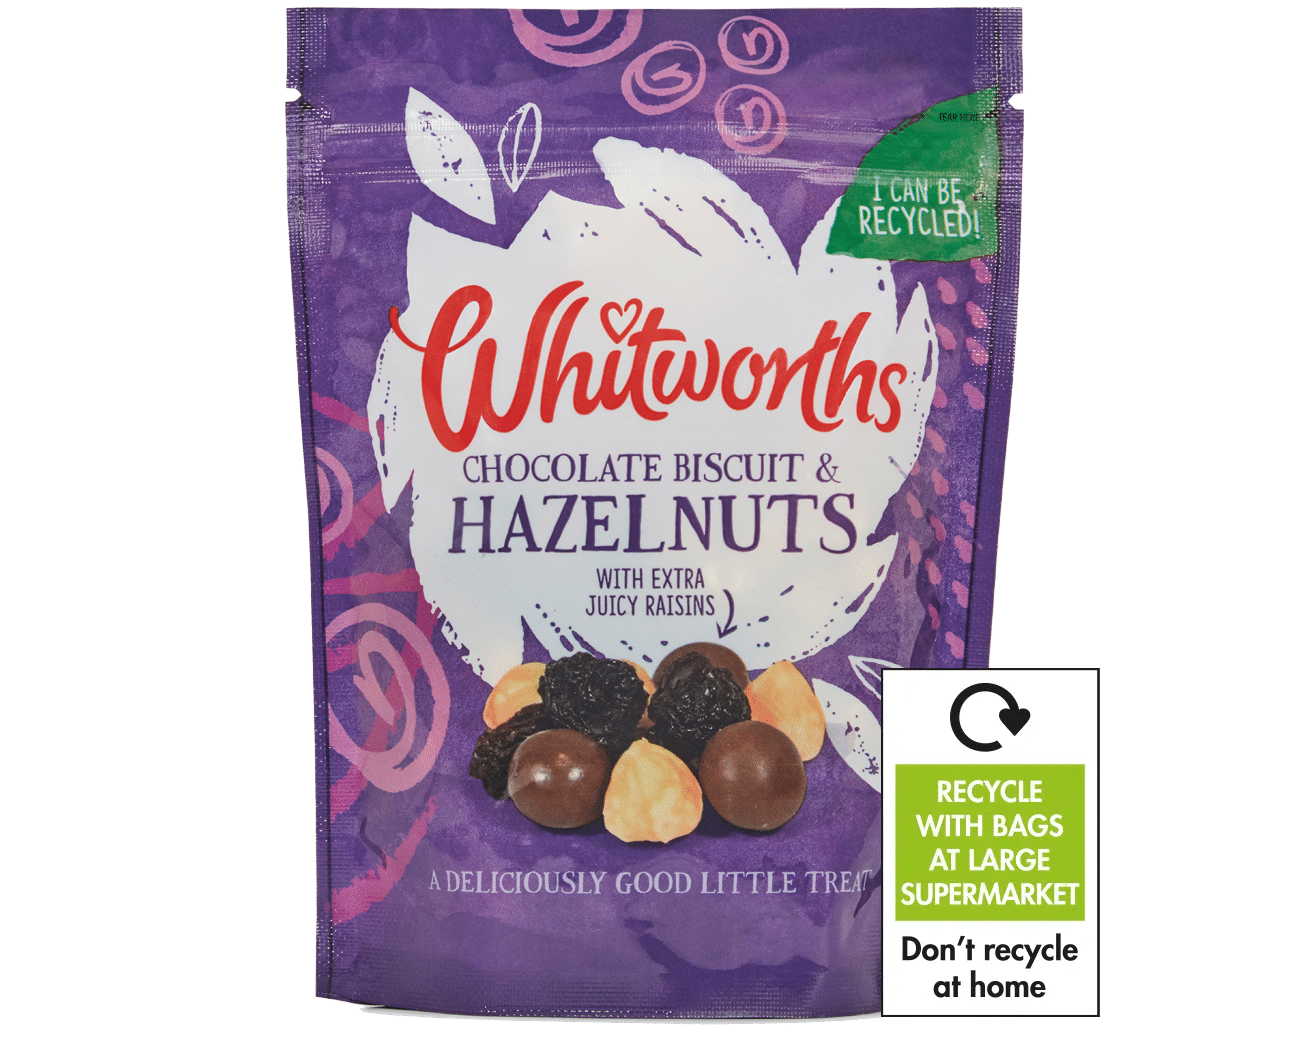 Whitworths chocolate biscuit and hazelnut recyclable pouch package